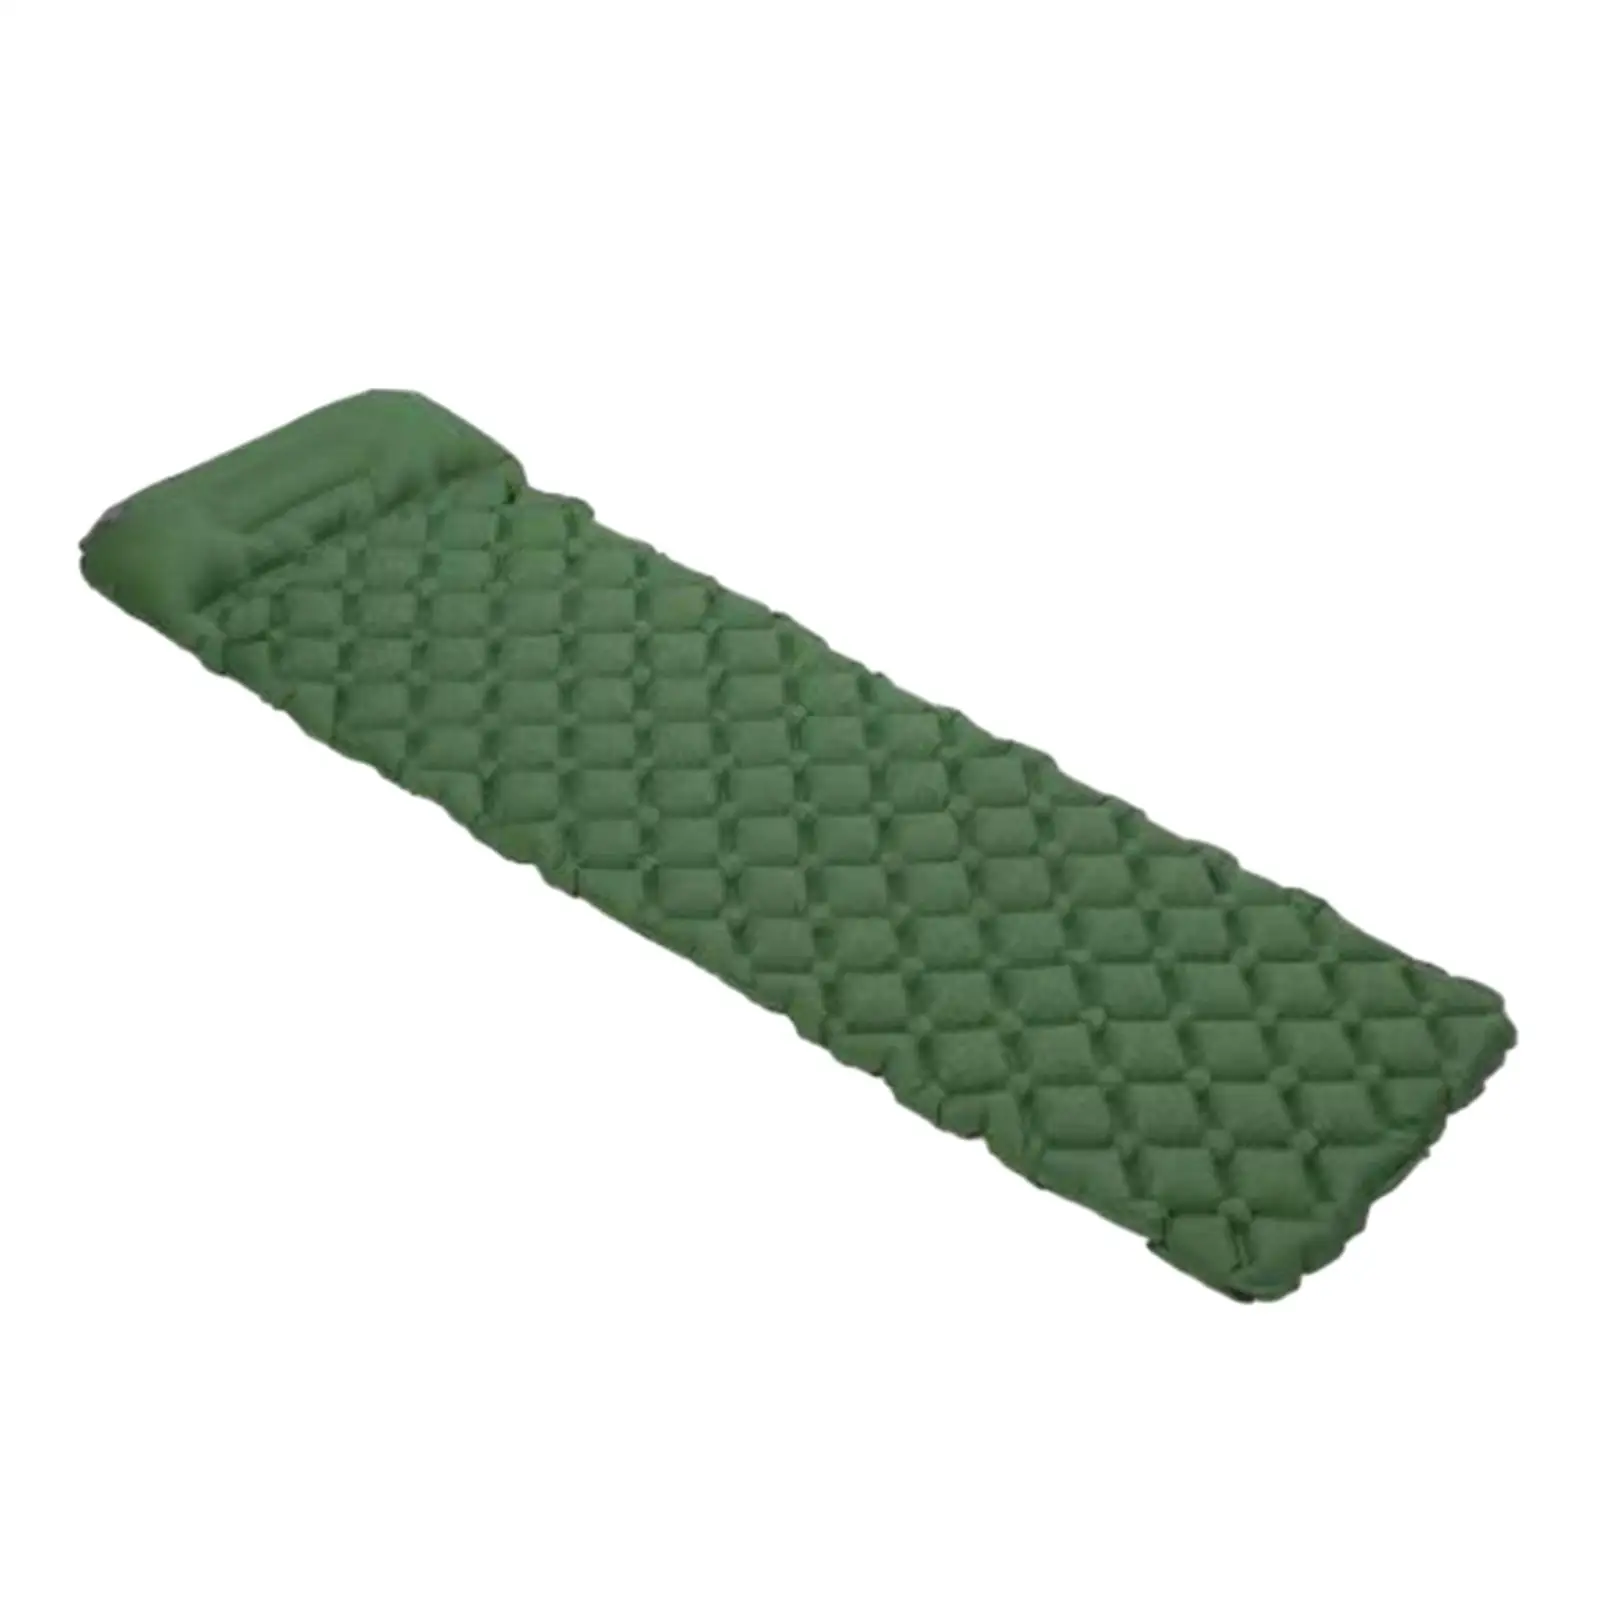 Camping Sleeping Pad with Pillow Waterproof Compact Self Inflating Sleeping Mat for Outdoor Tent Traveling Hiking Backpacking